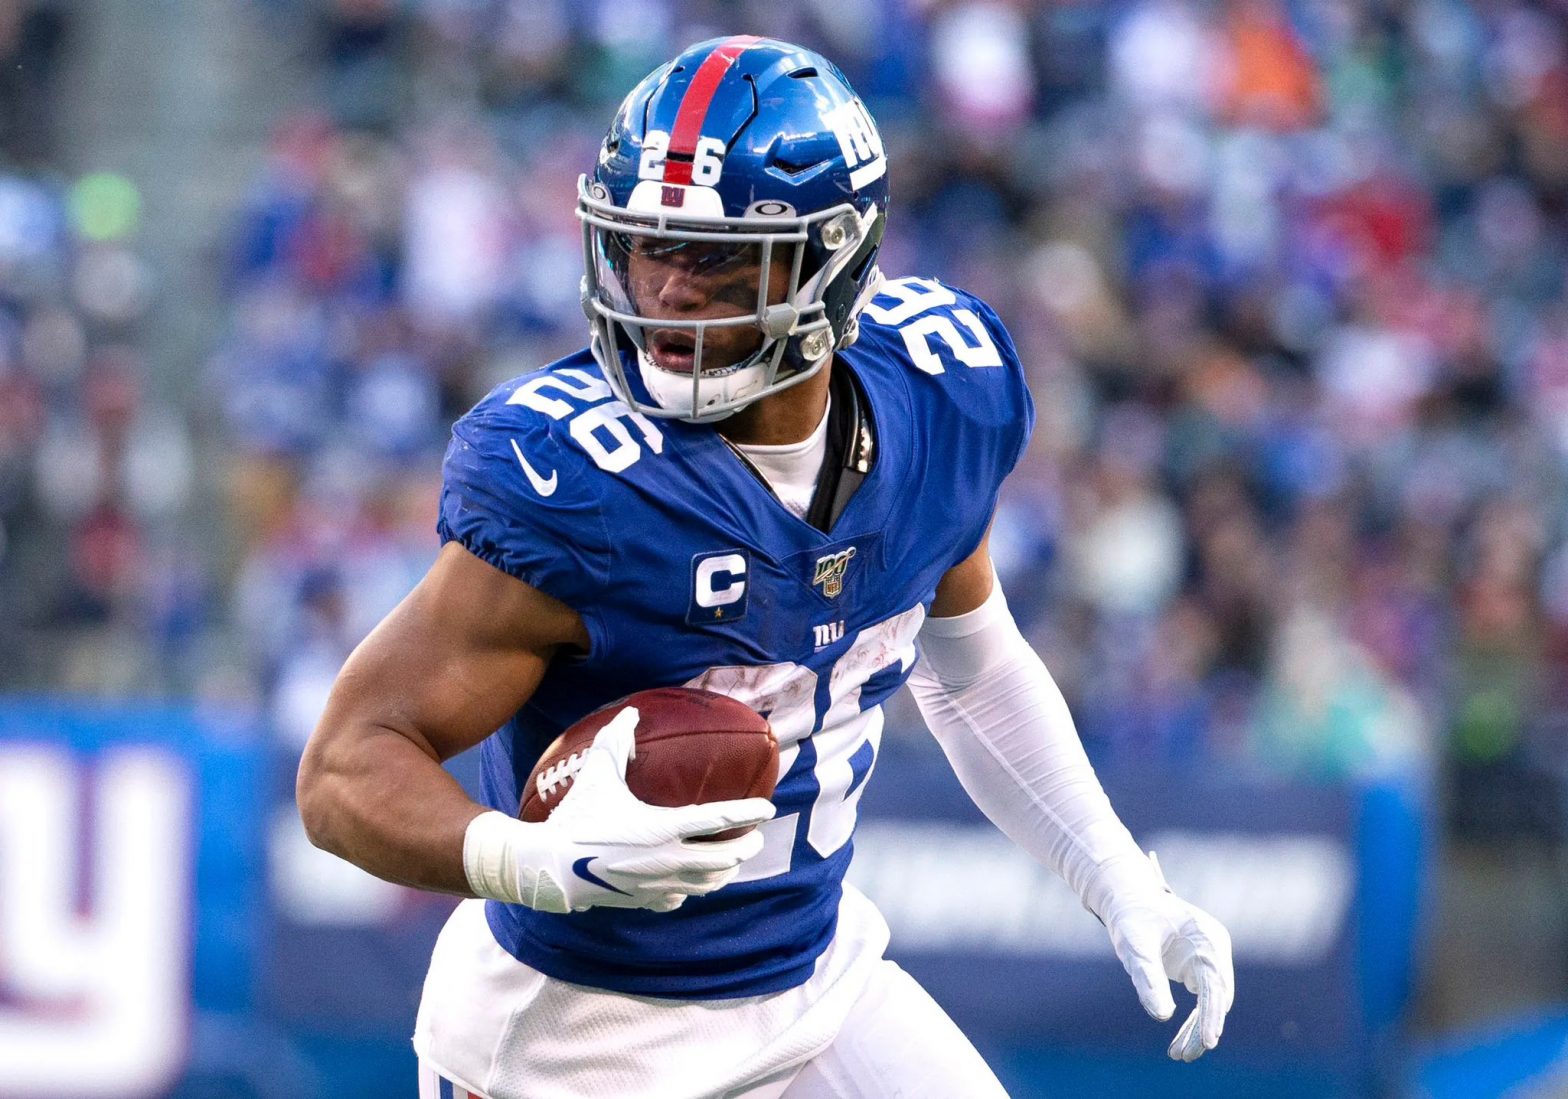 New York Giants improve Saquon Barkley’s offer ahead of deadline day | Complete contract details